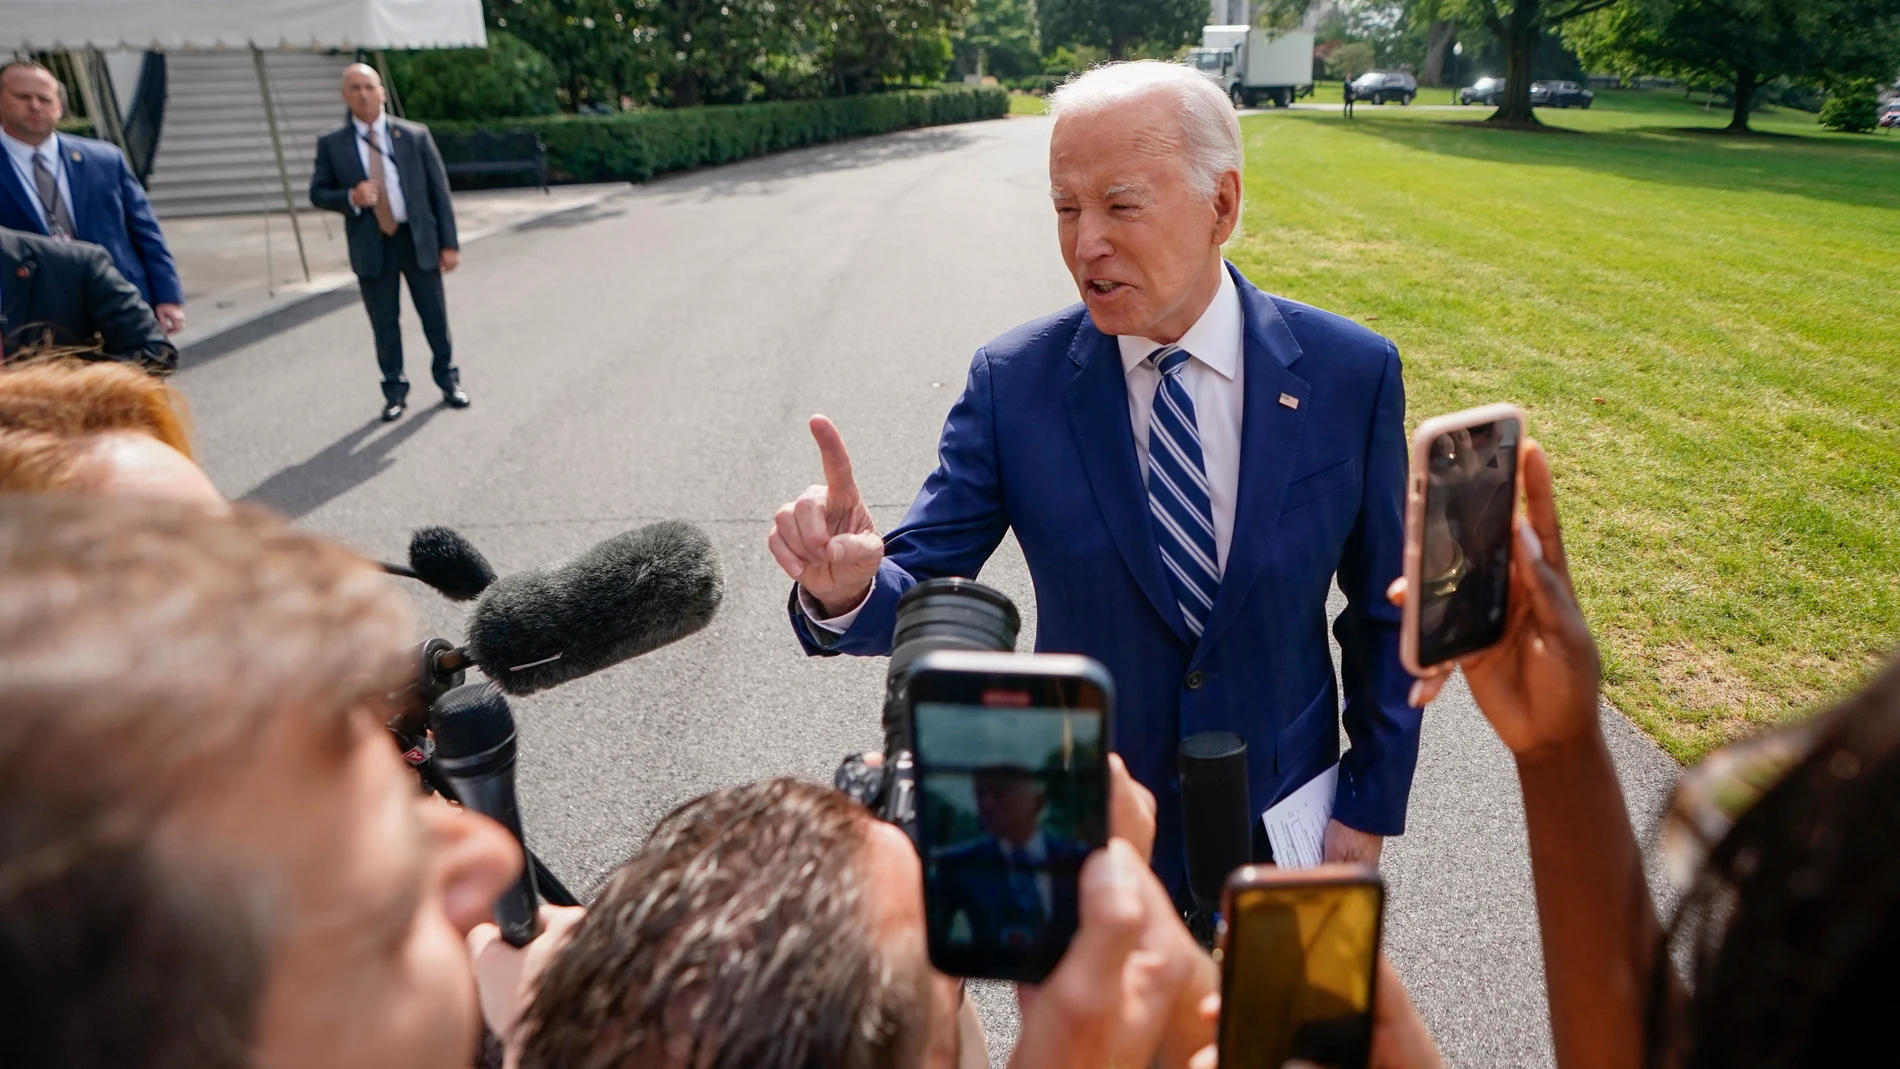 Washington (United States), 28/06/2023.- US President Joe Biden responds to a question from the news media as he walks to board Marine One on the South Lawn, USA, 28 June 2023. President Biden is traveling to Chicago to deliver remarks on his economic plan. (Estados Unidos) EFE/EPA/SHAWN THEW 